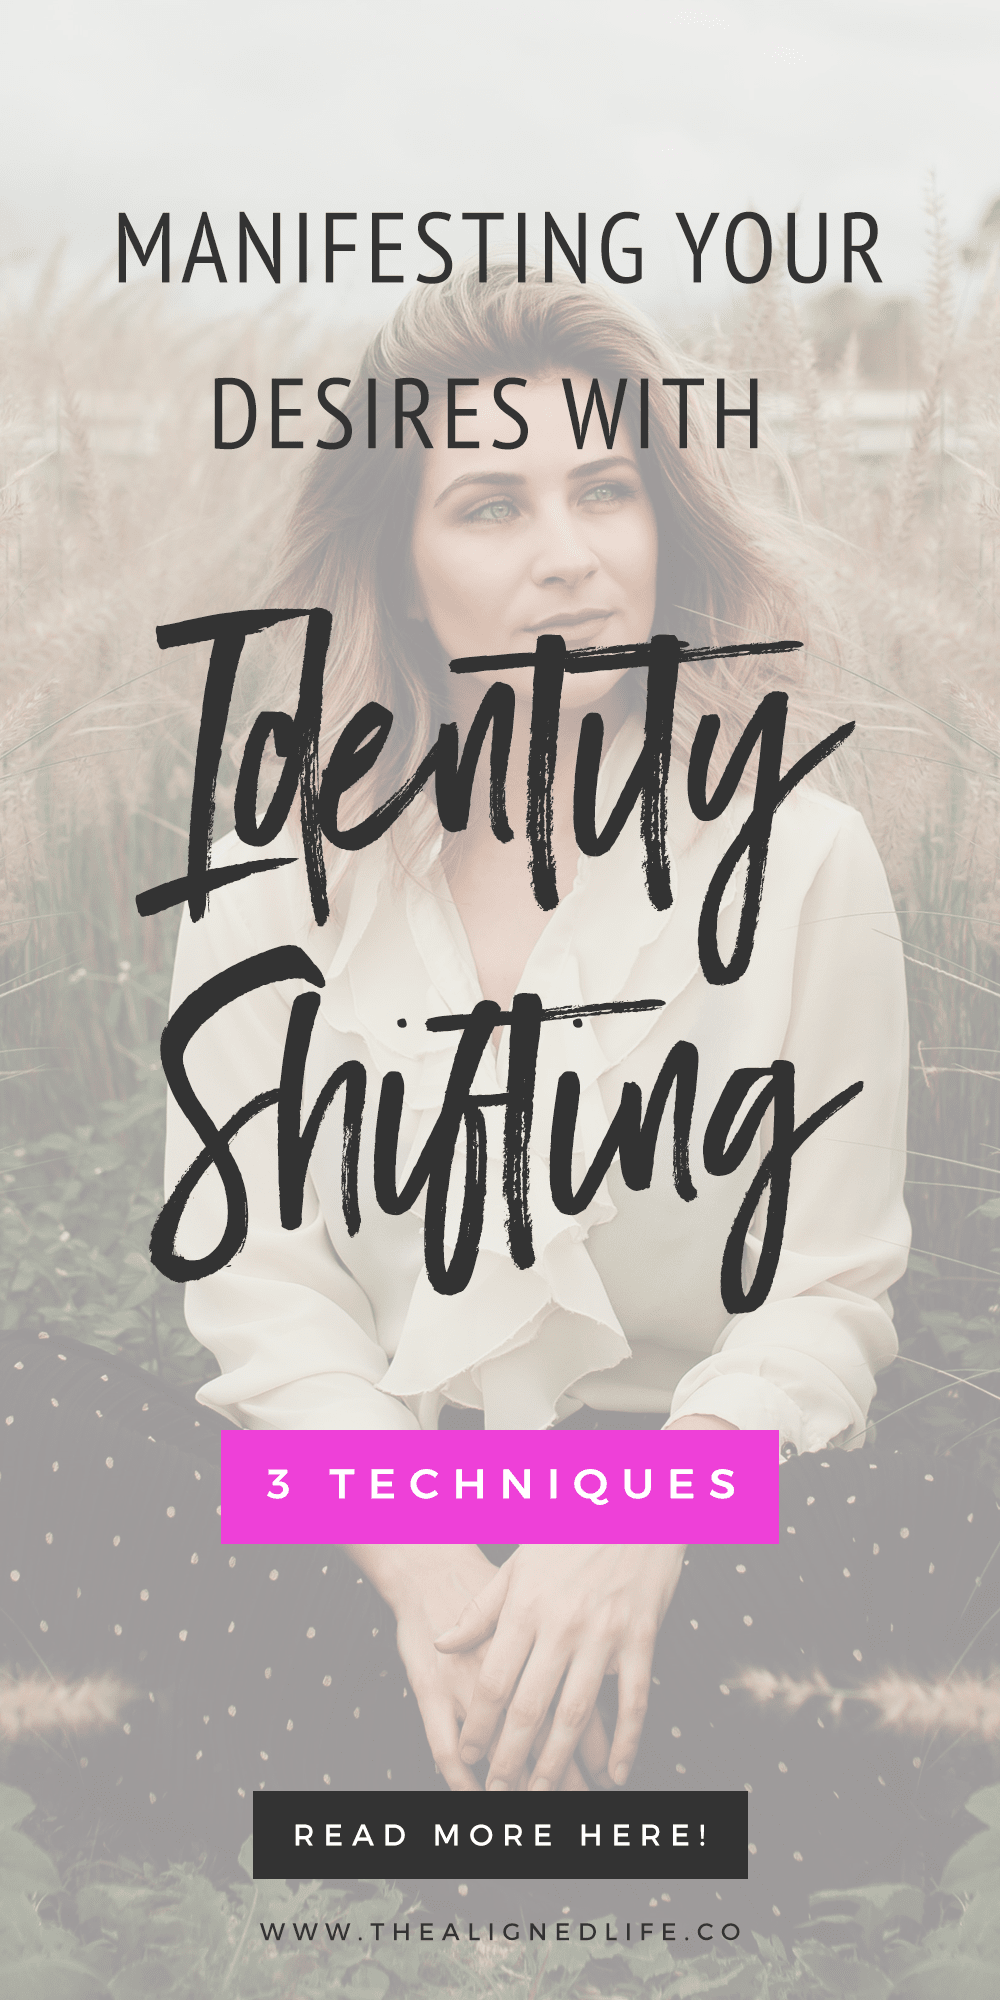 Manifest Your Desires With Identity Shifting: 3 Techniques